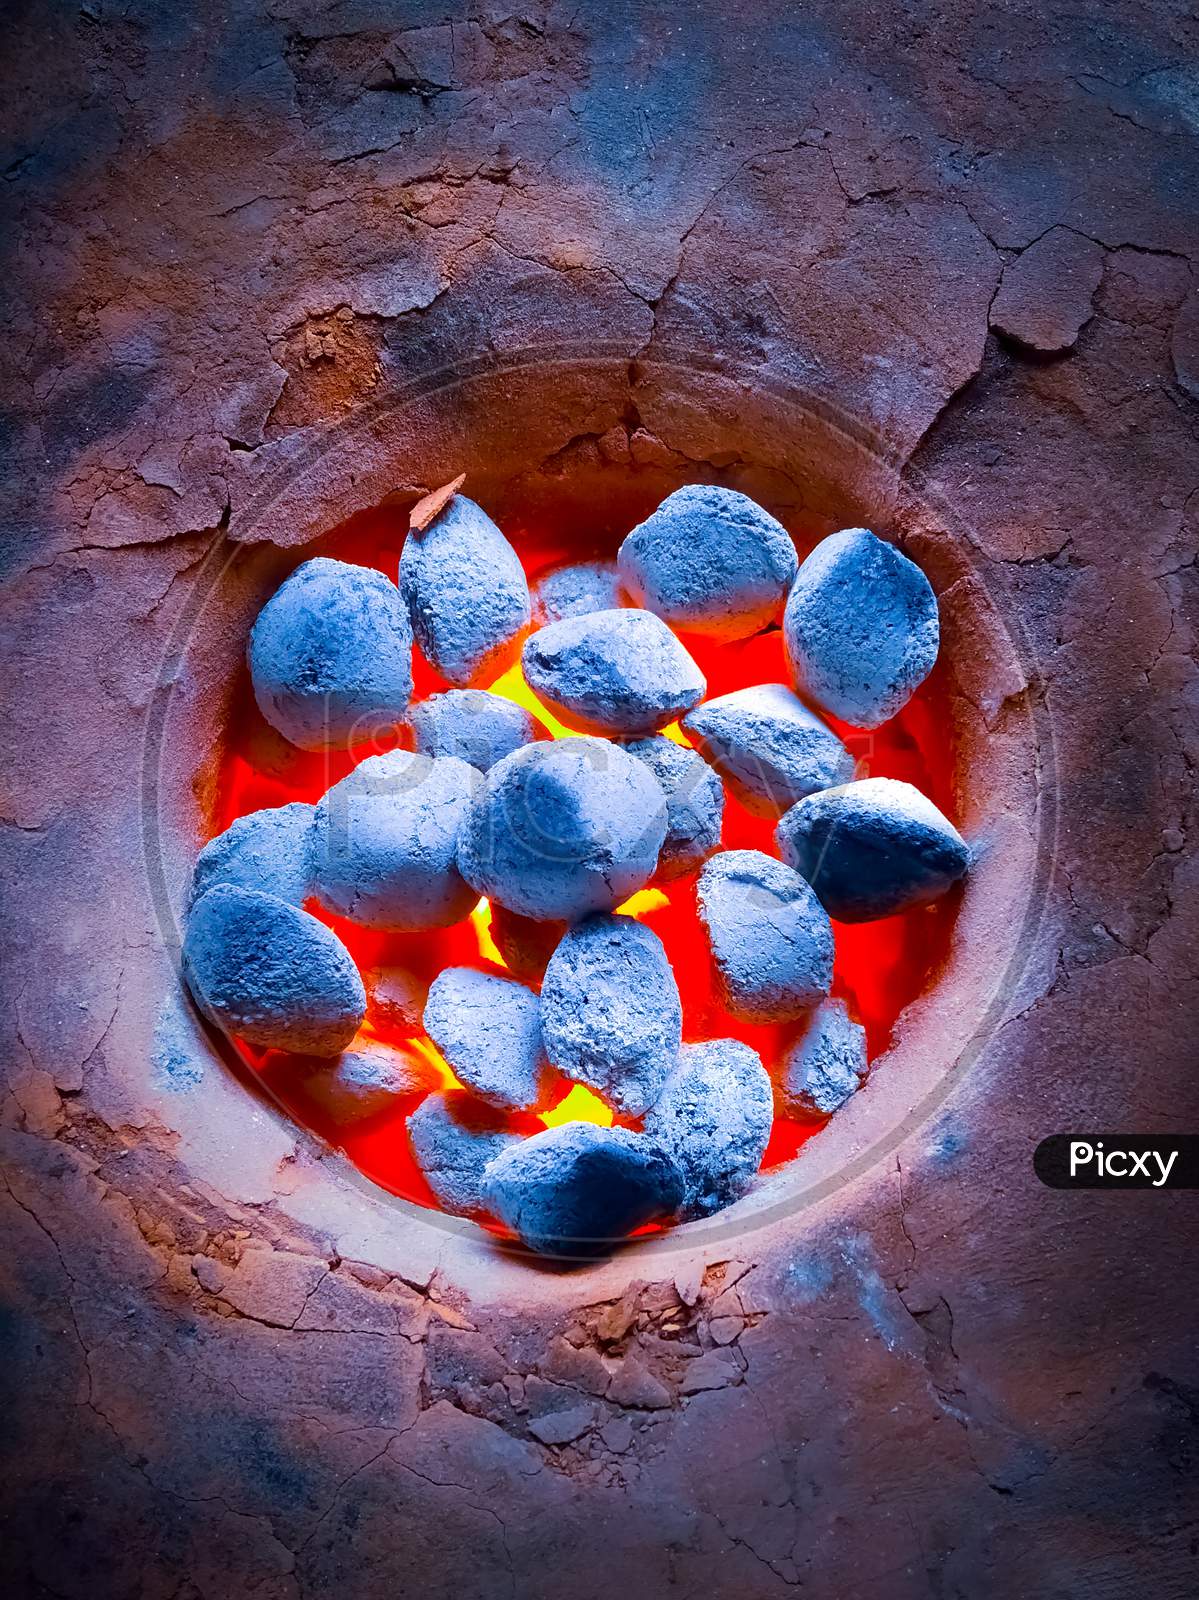 Earthen Stove. Traditional Indian Cooking With An Charcoal Earth Oven In Rural Village. Coal Fire Burning Close Up.